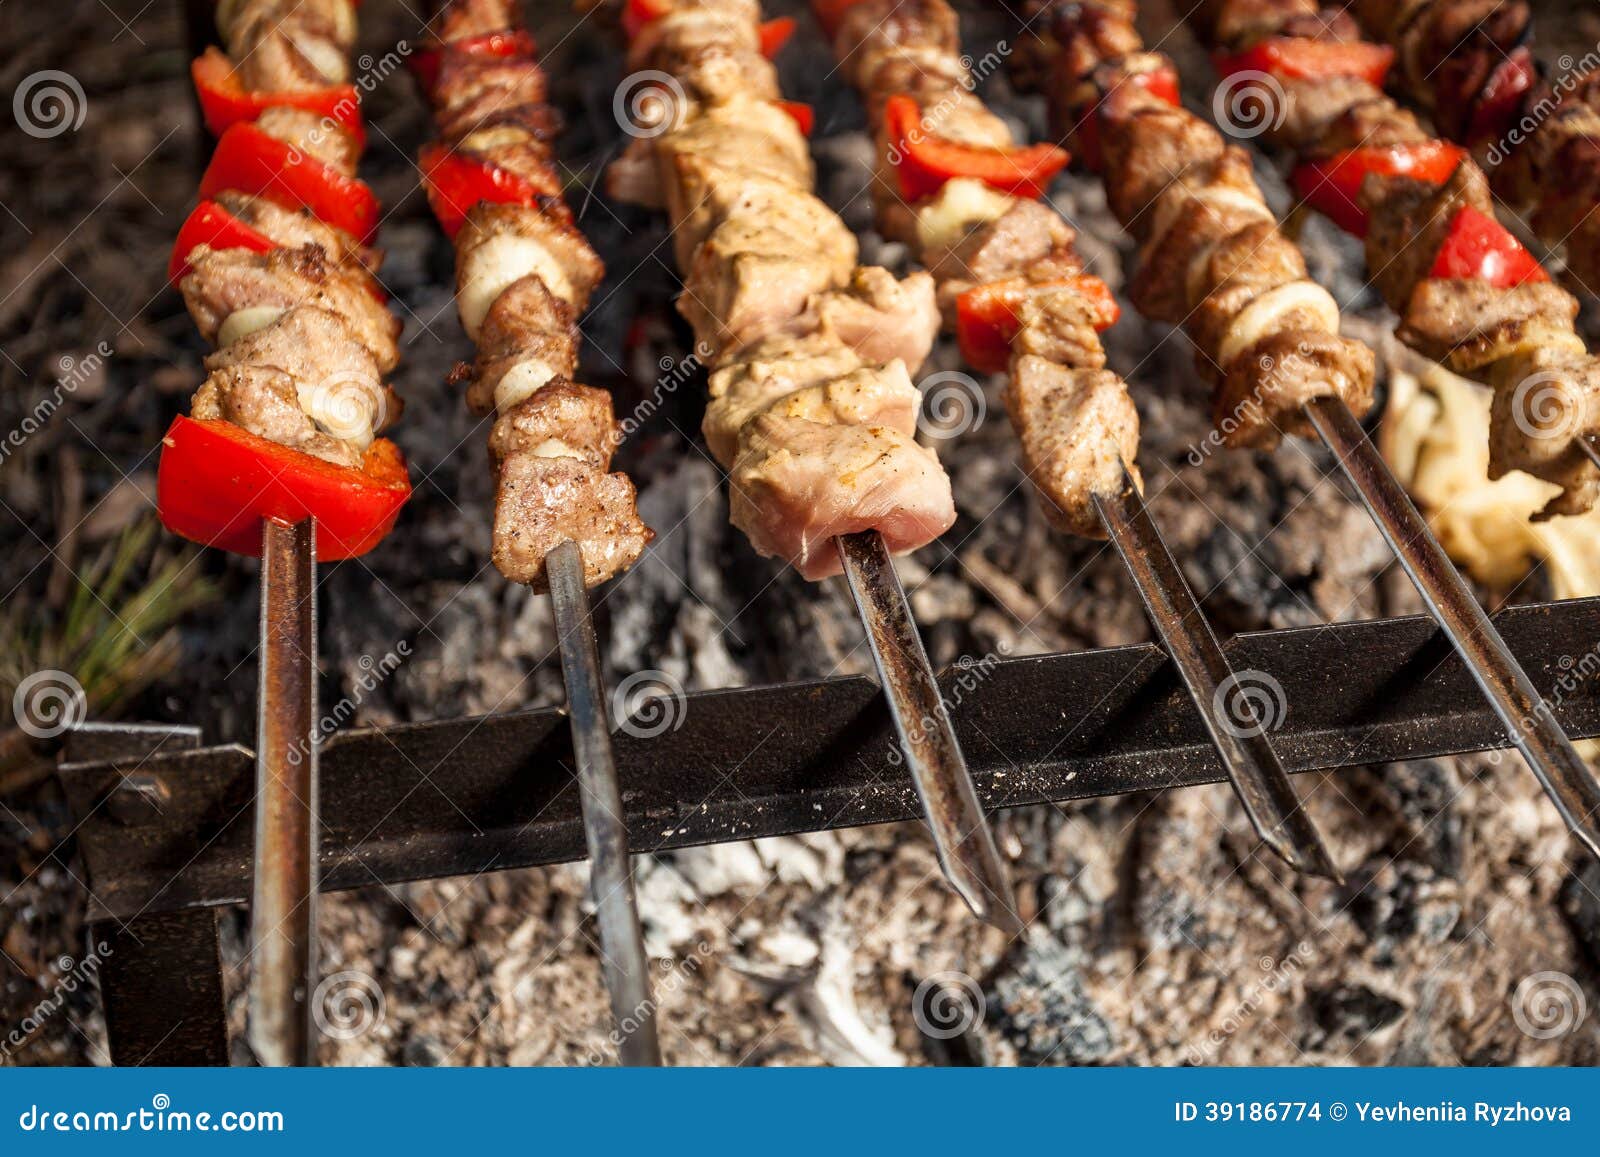 Photo of Meat on Fire at Forest Stock Photo - Image of cooking ...